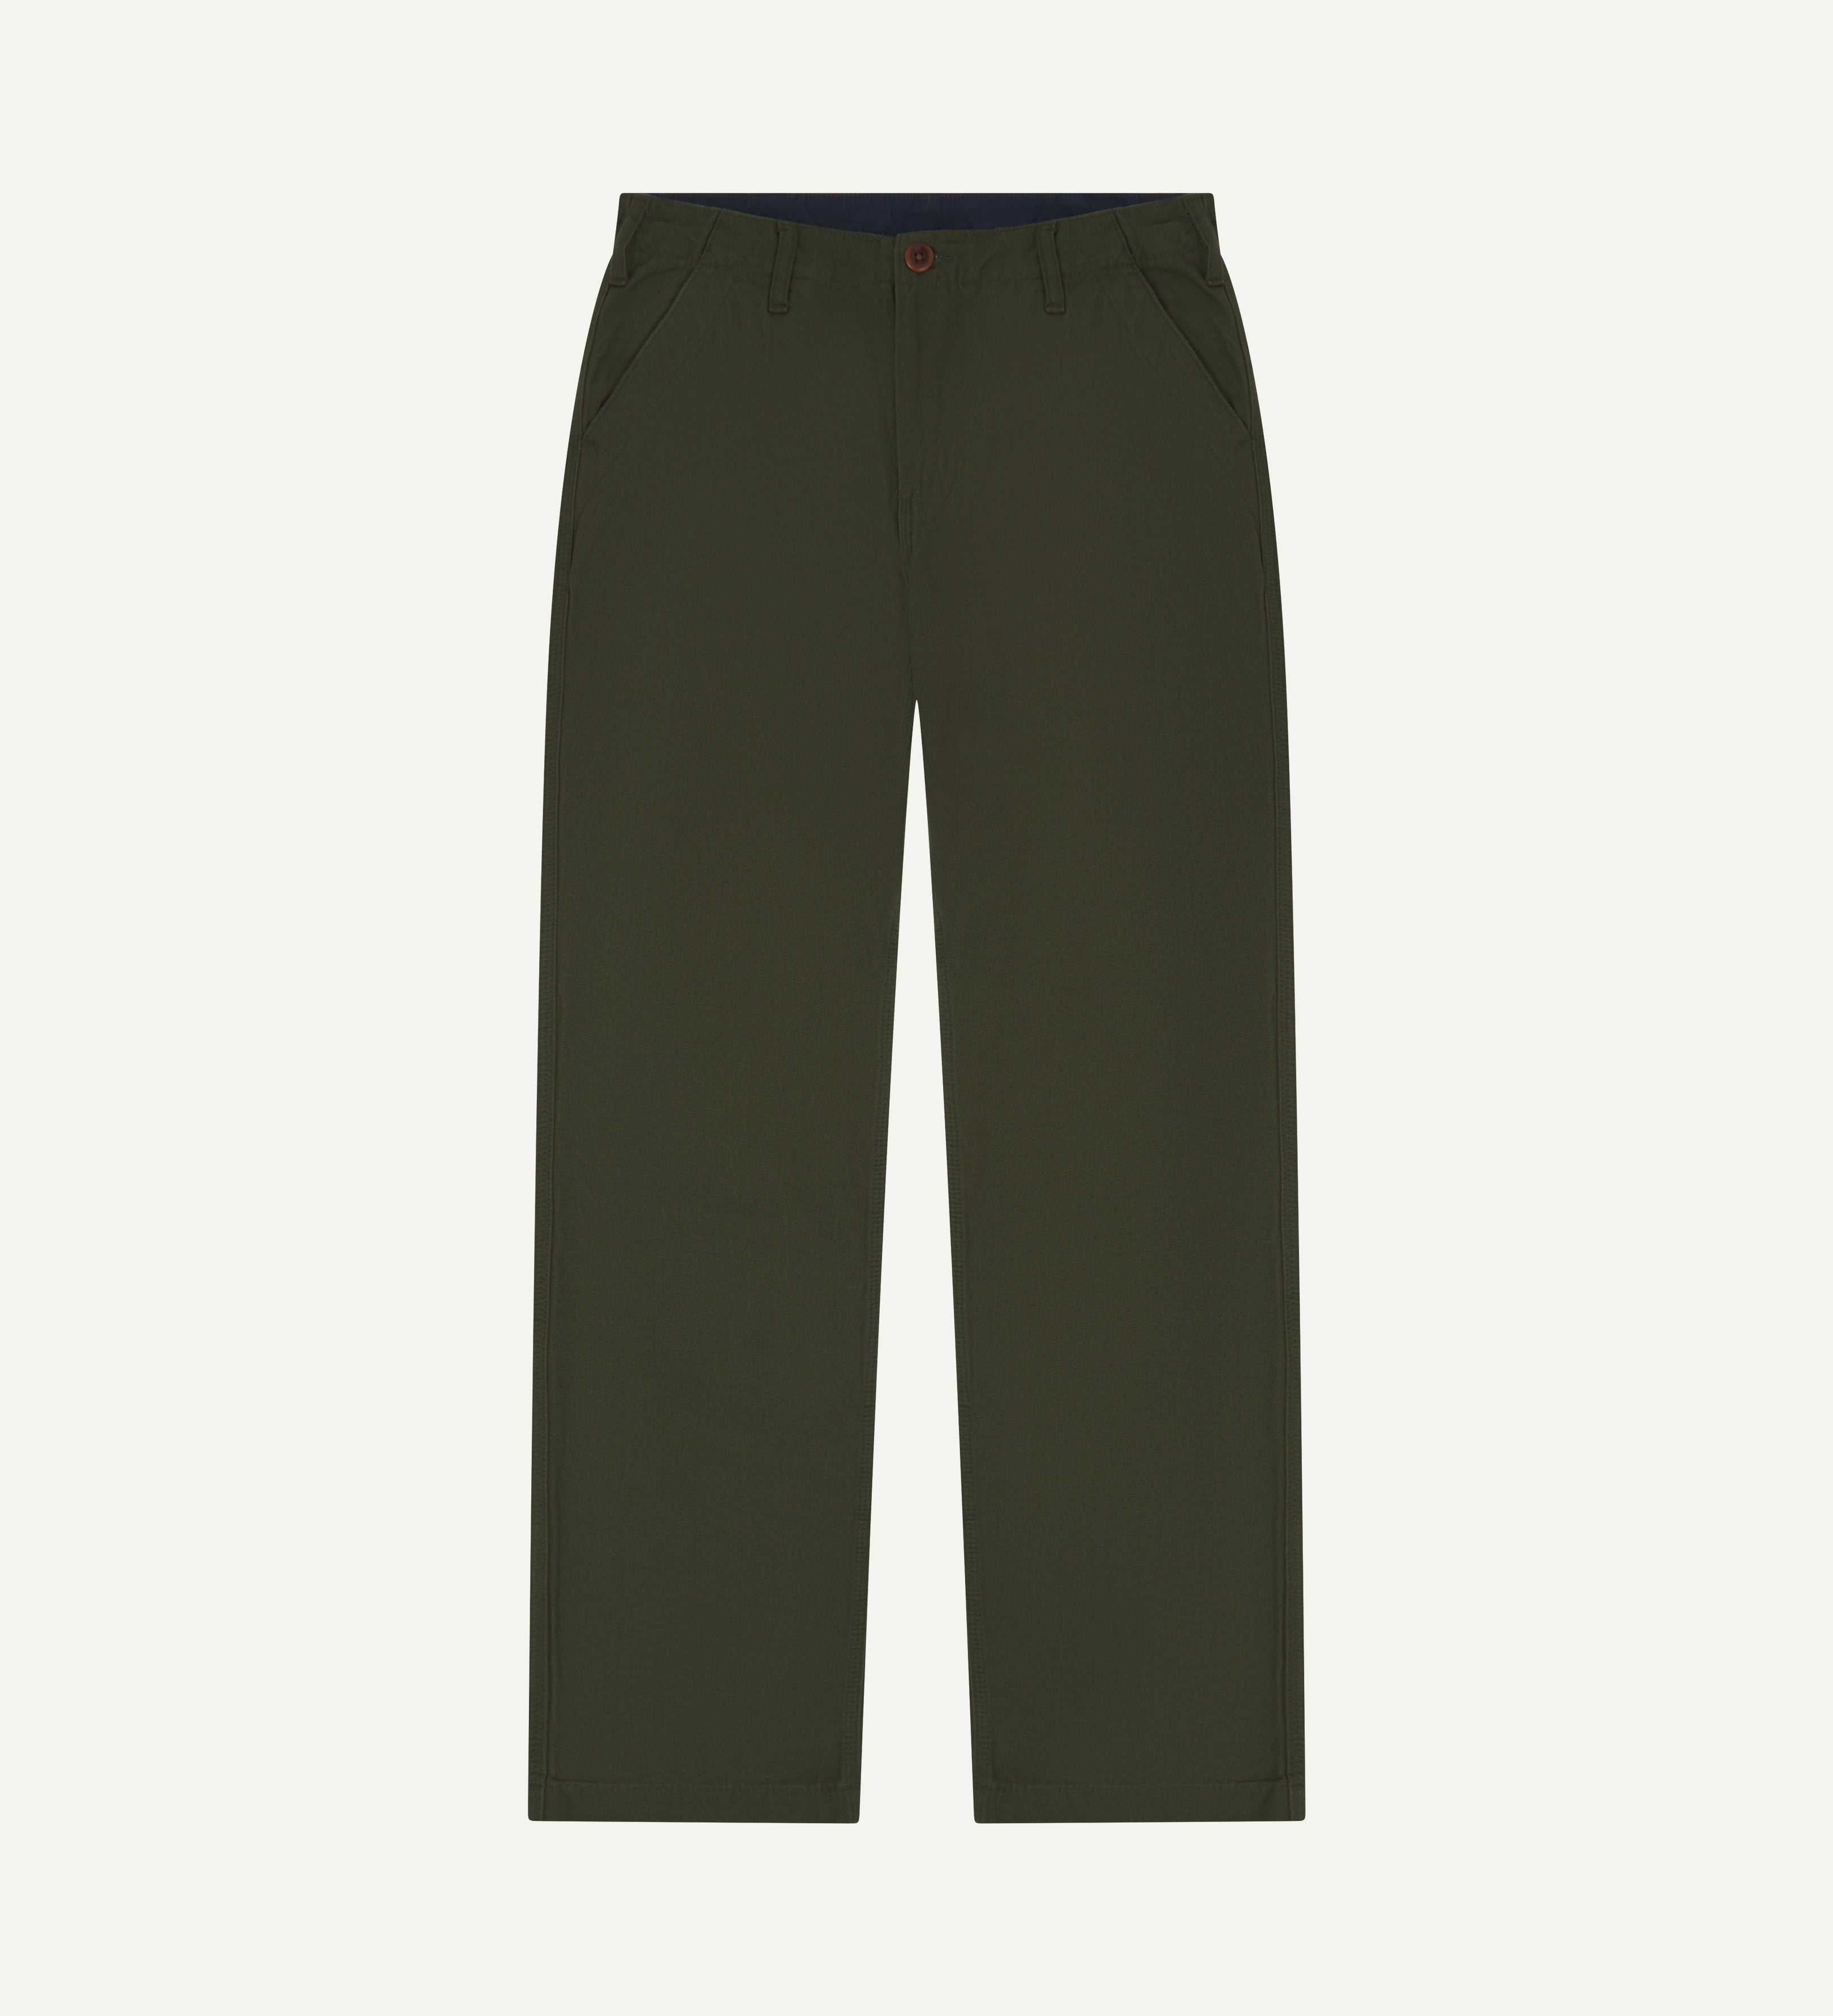 Flat shot of front of #5005 Uskees men's organic cotton vine green workwear trousers with view of brown corozo button and belt loops